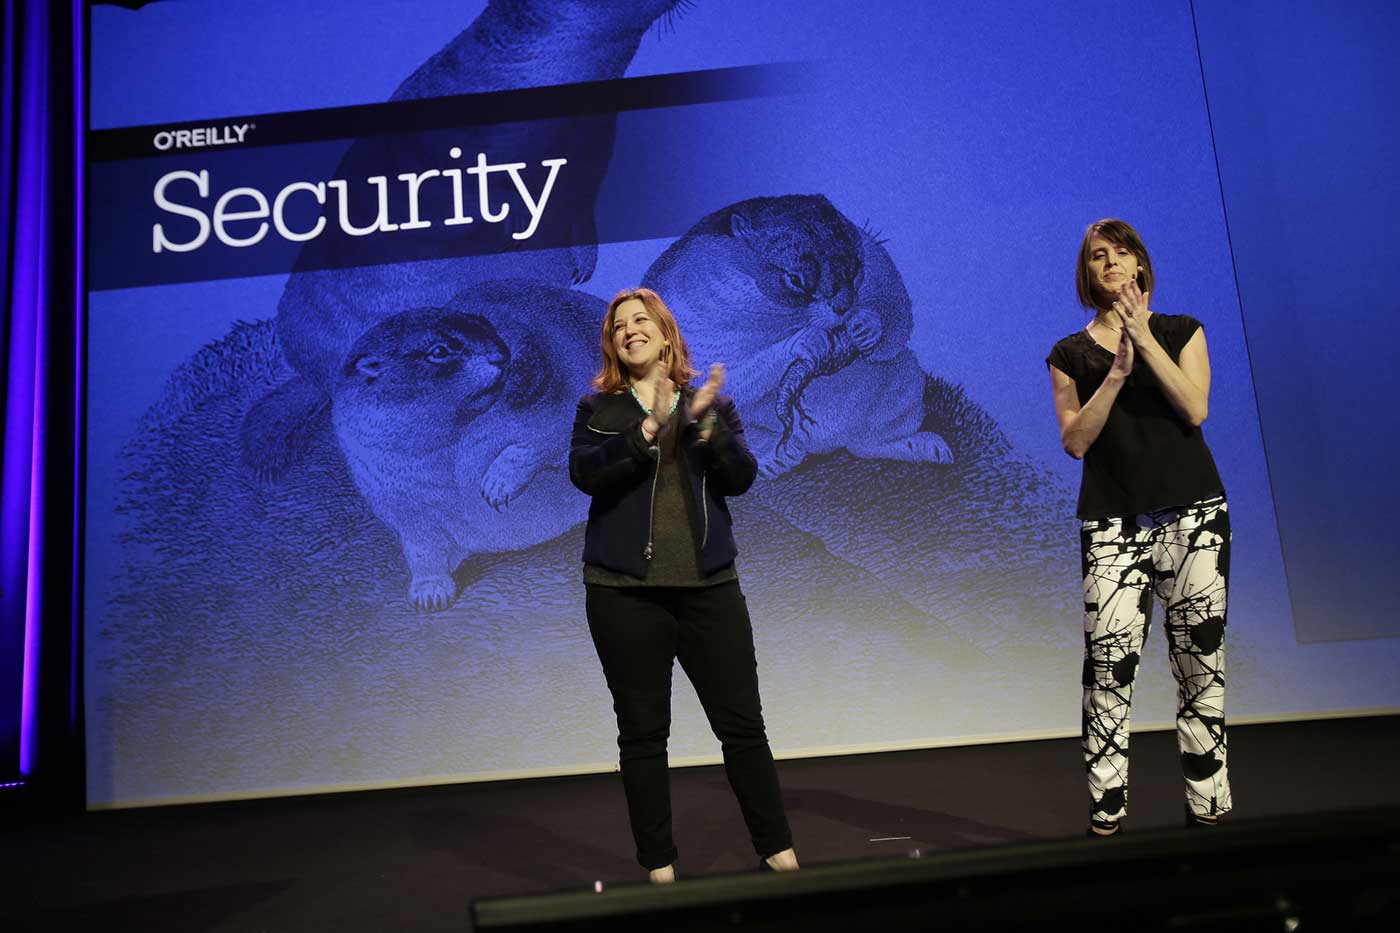 Allison Miller (left) and Courtney Nash (right) at the O'Reilly Security Conference in Amsterdam 2016.